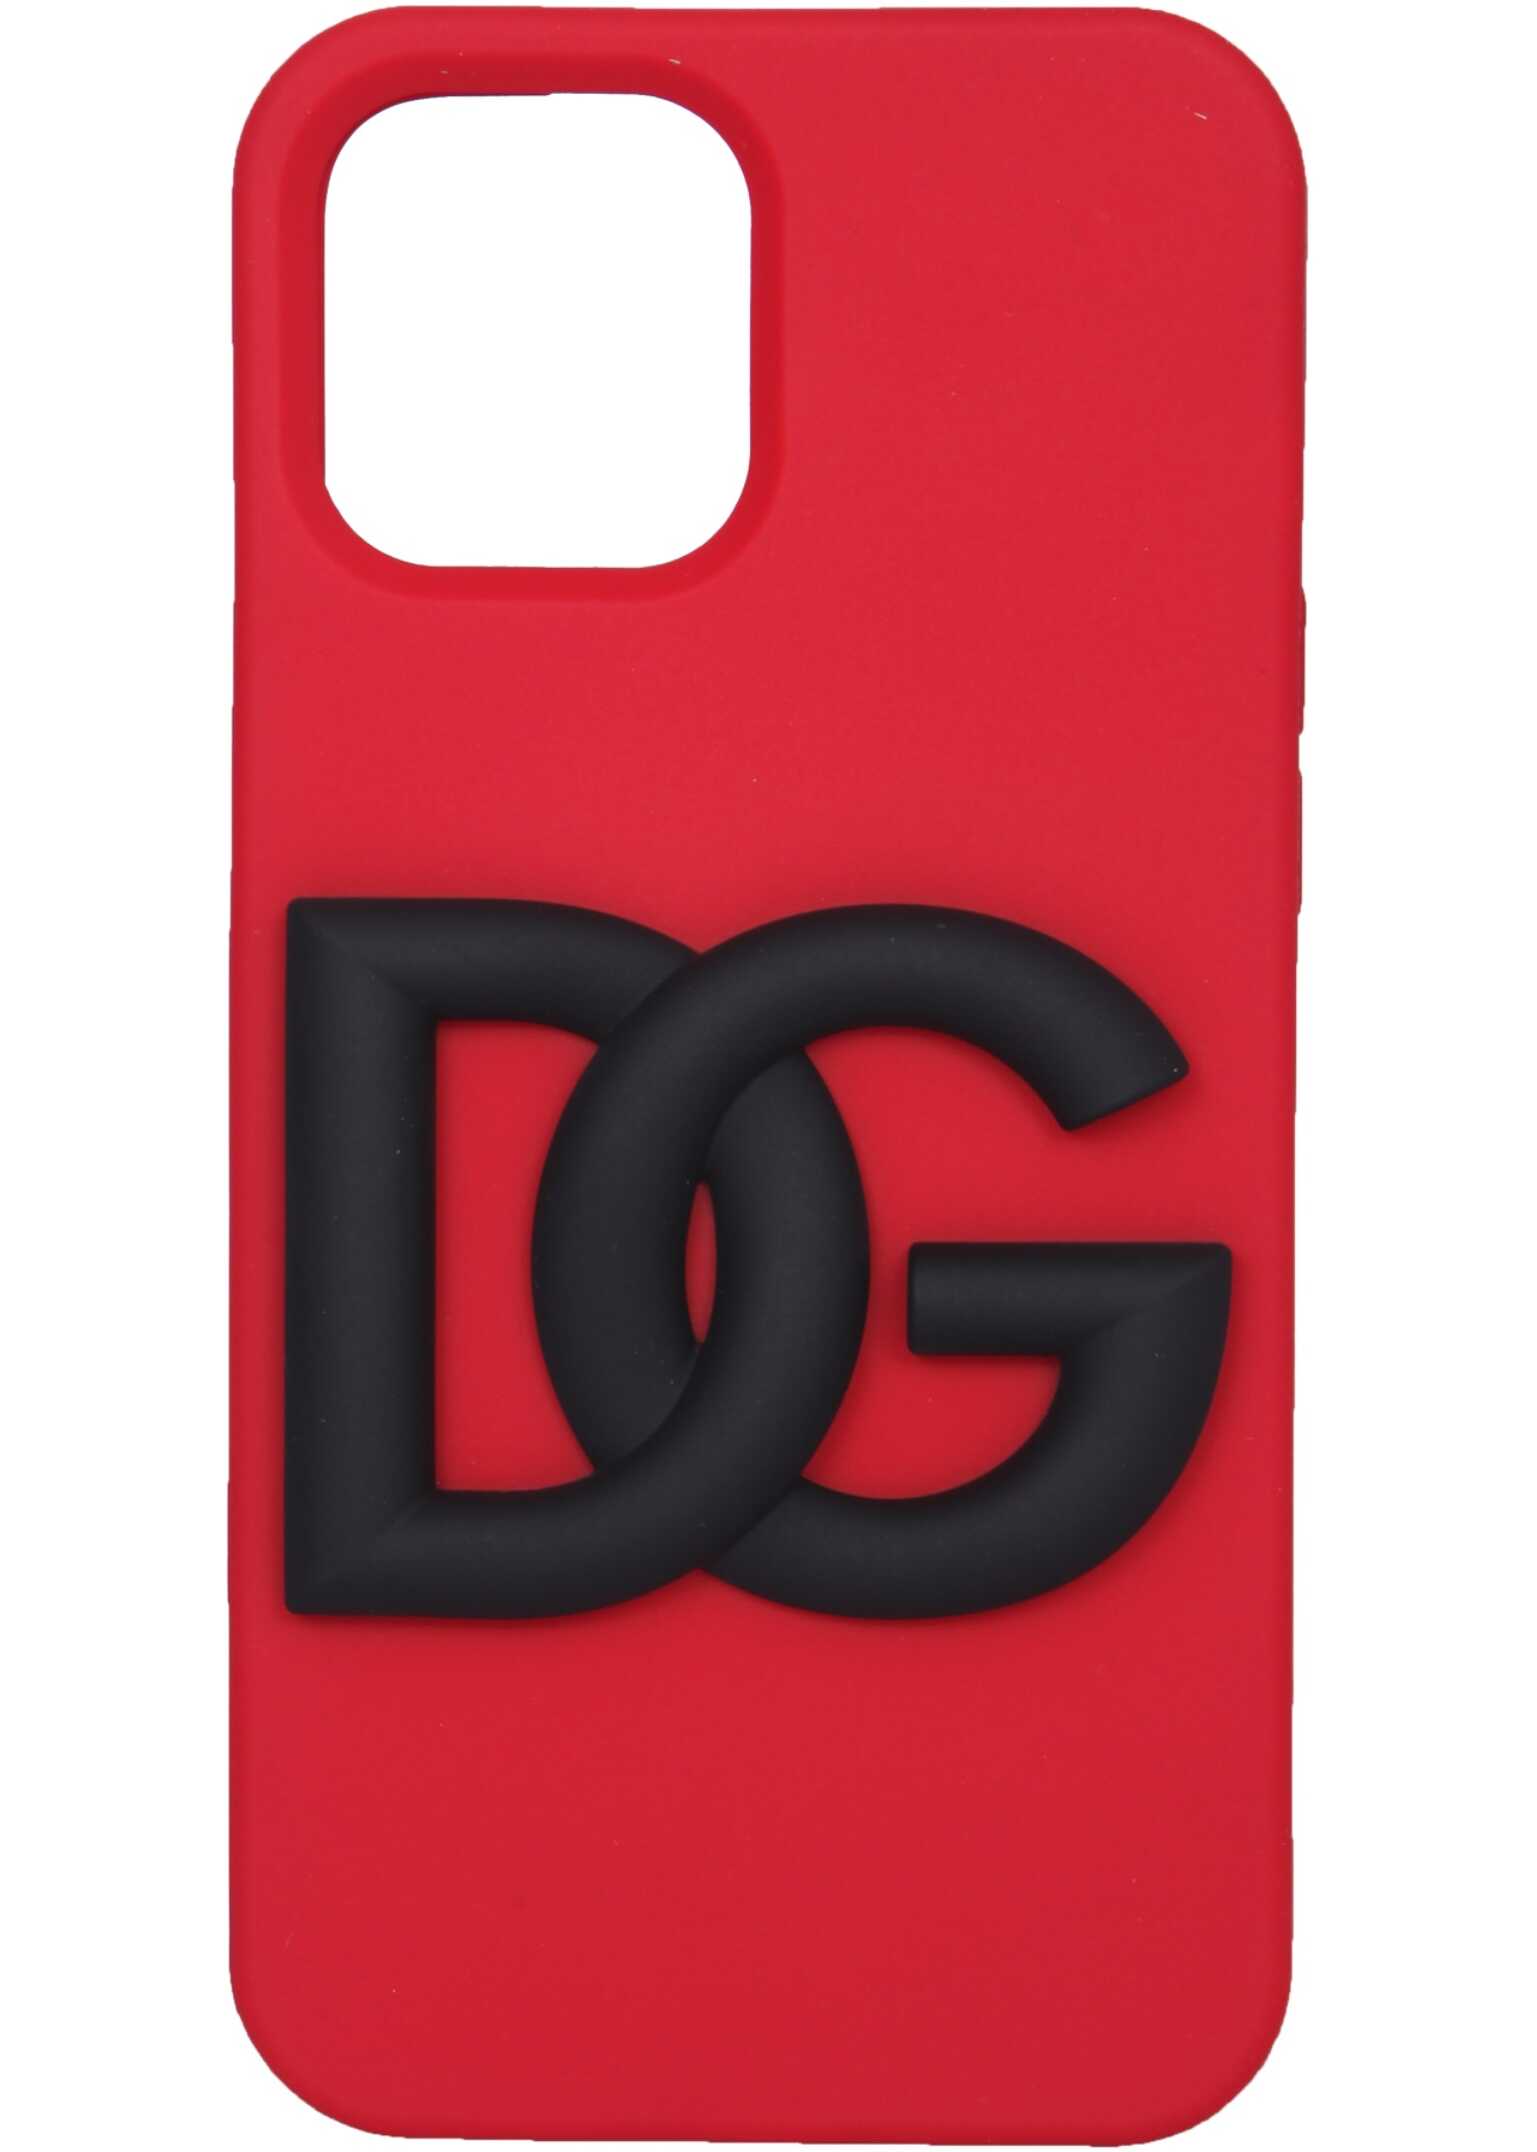 Dolce & Gabbana Iphone 12 Pro Max Cover BP2908_AO97689854 RED image